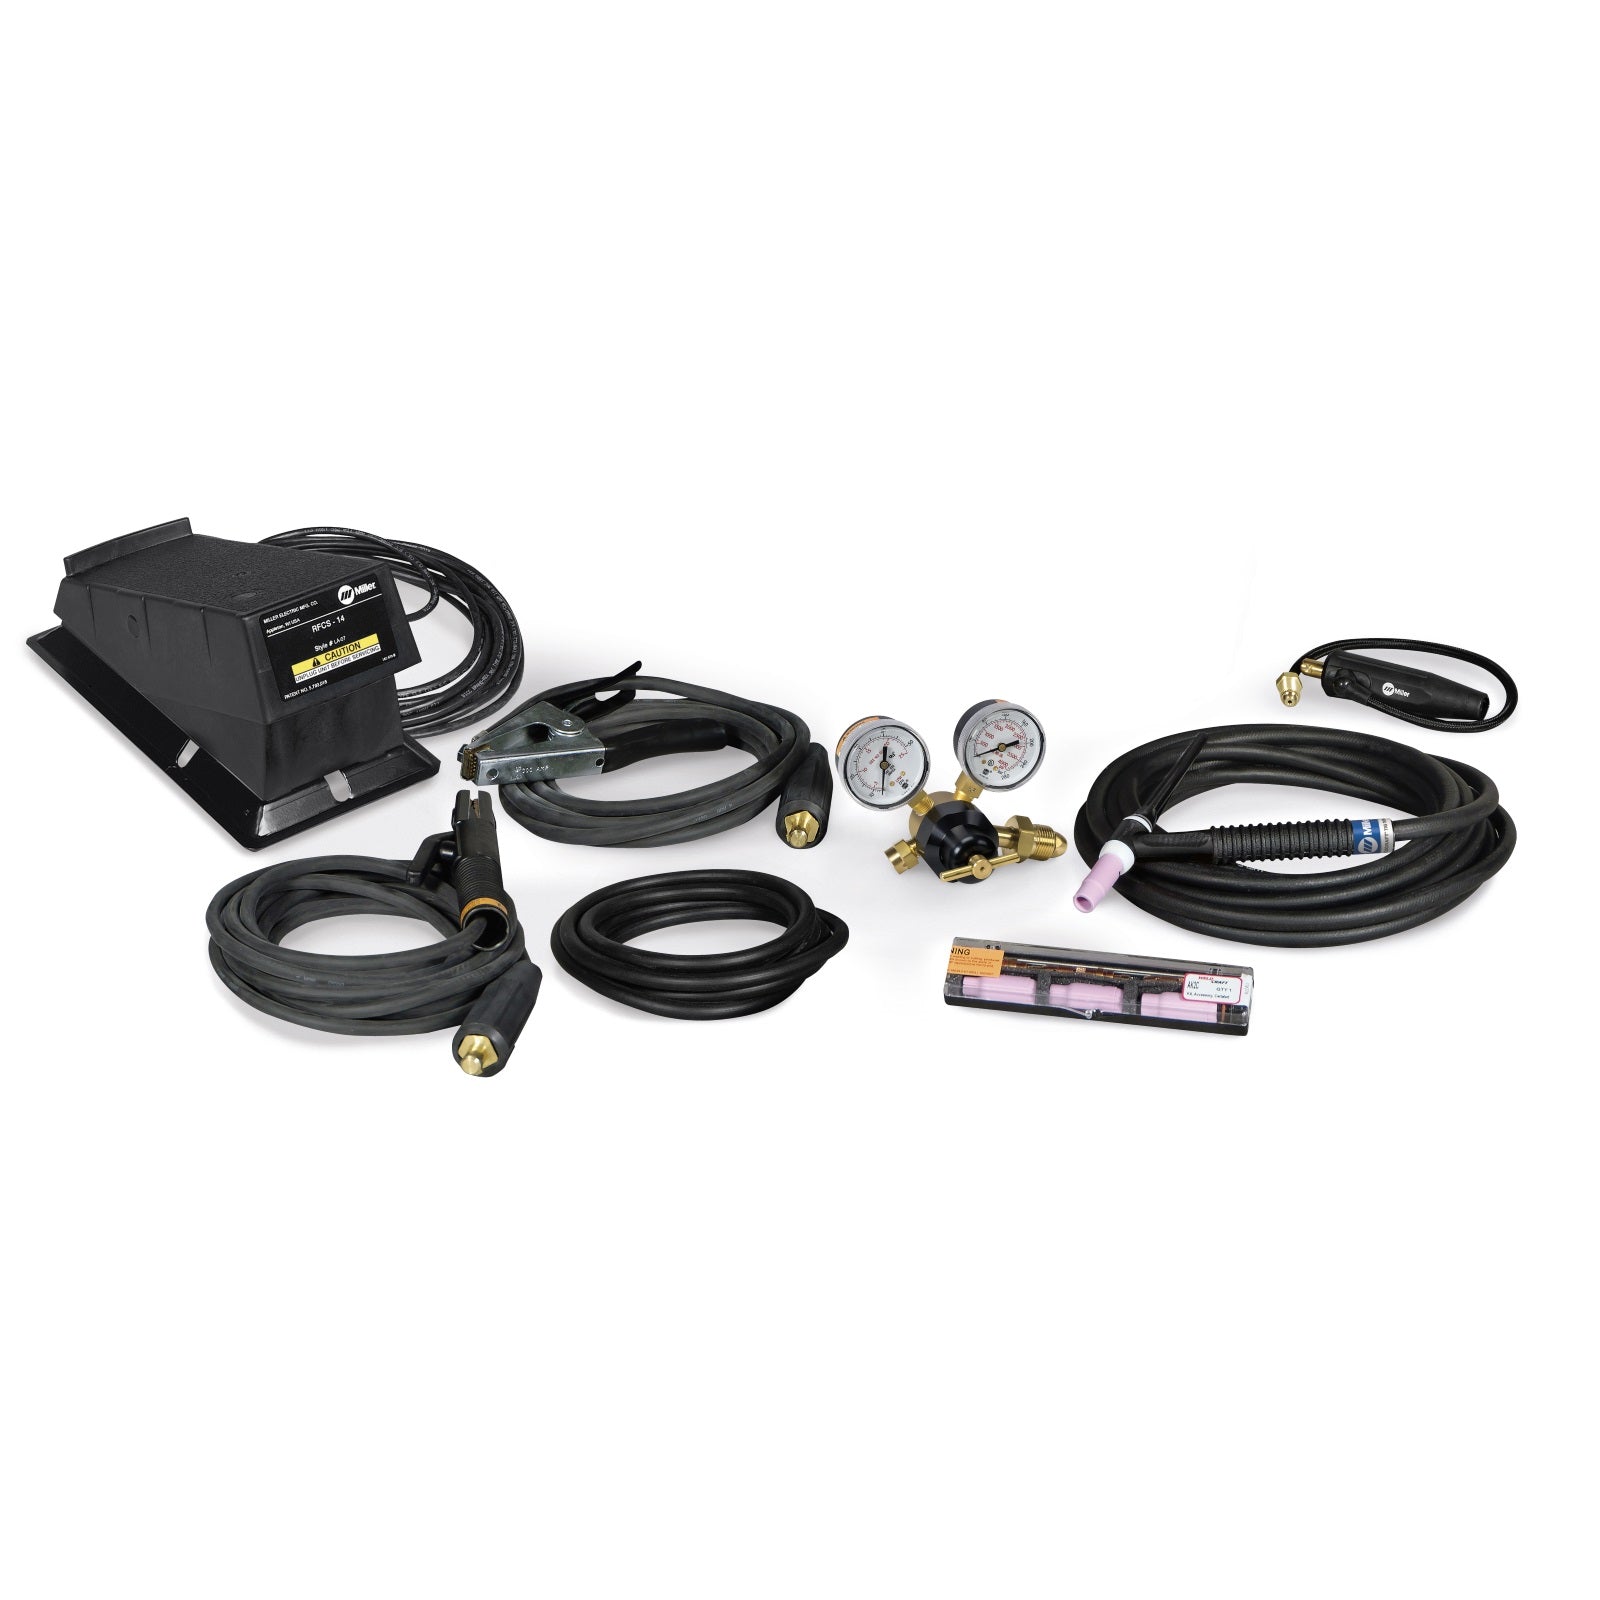 Miller 150A RFCS-14 Contractor's Kit w/Foot Control (301309)